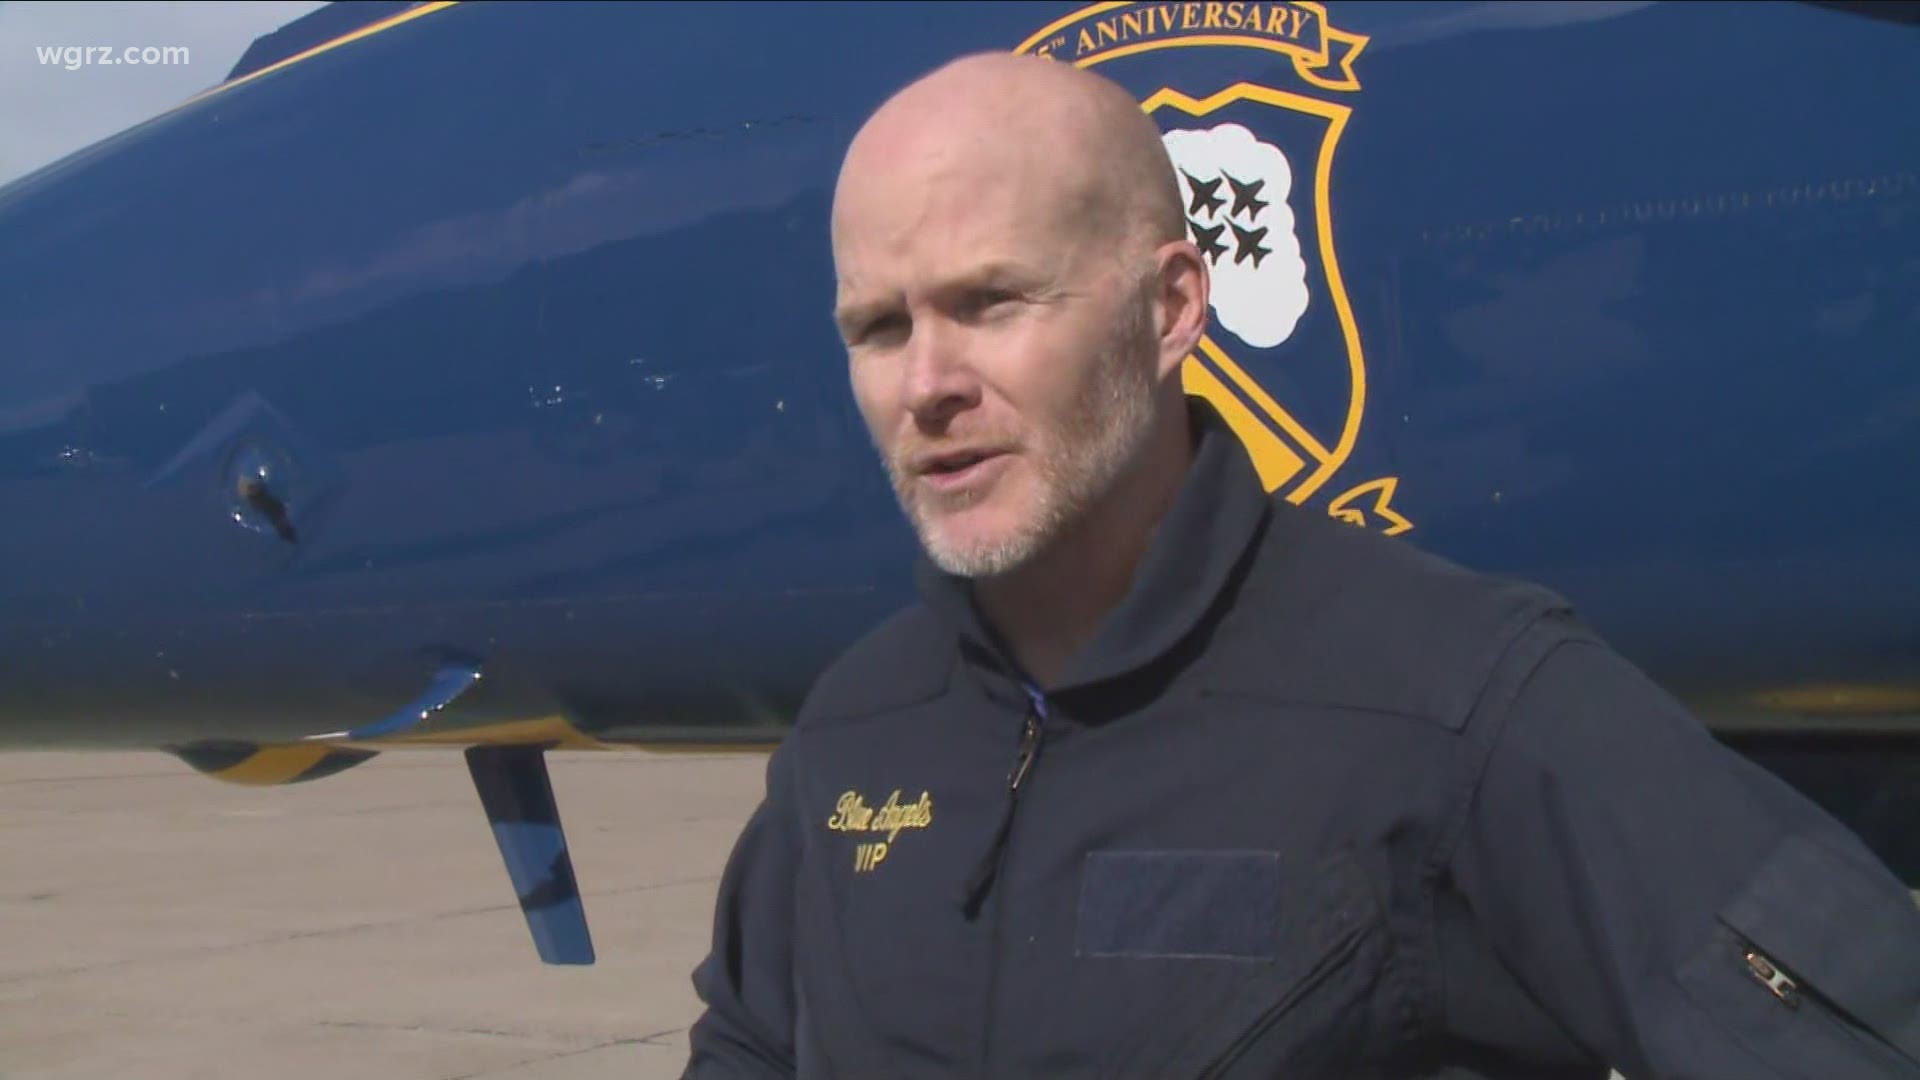 'Game days are intense, but that intensity was unlike anything I've ever been a part of,' the Bills coach said following his Blue Angels experience.